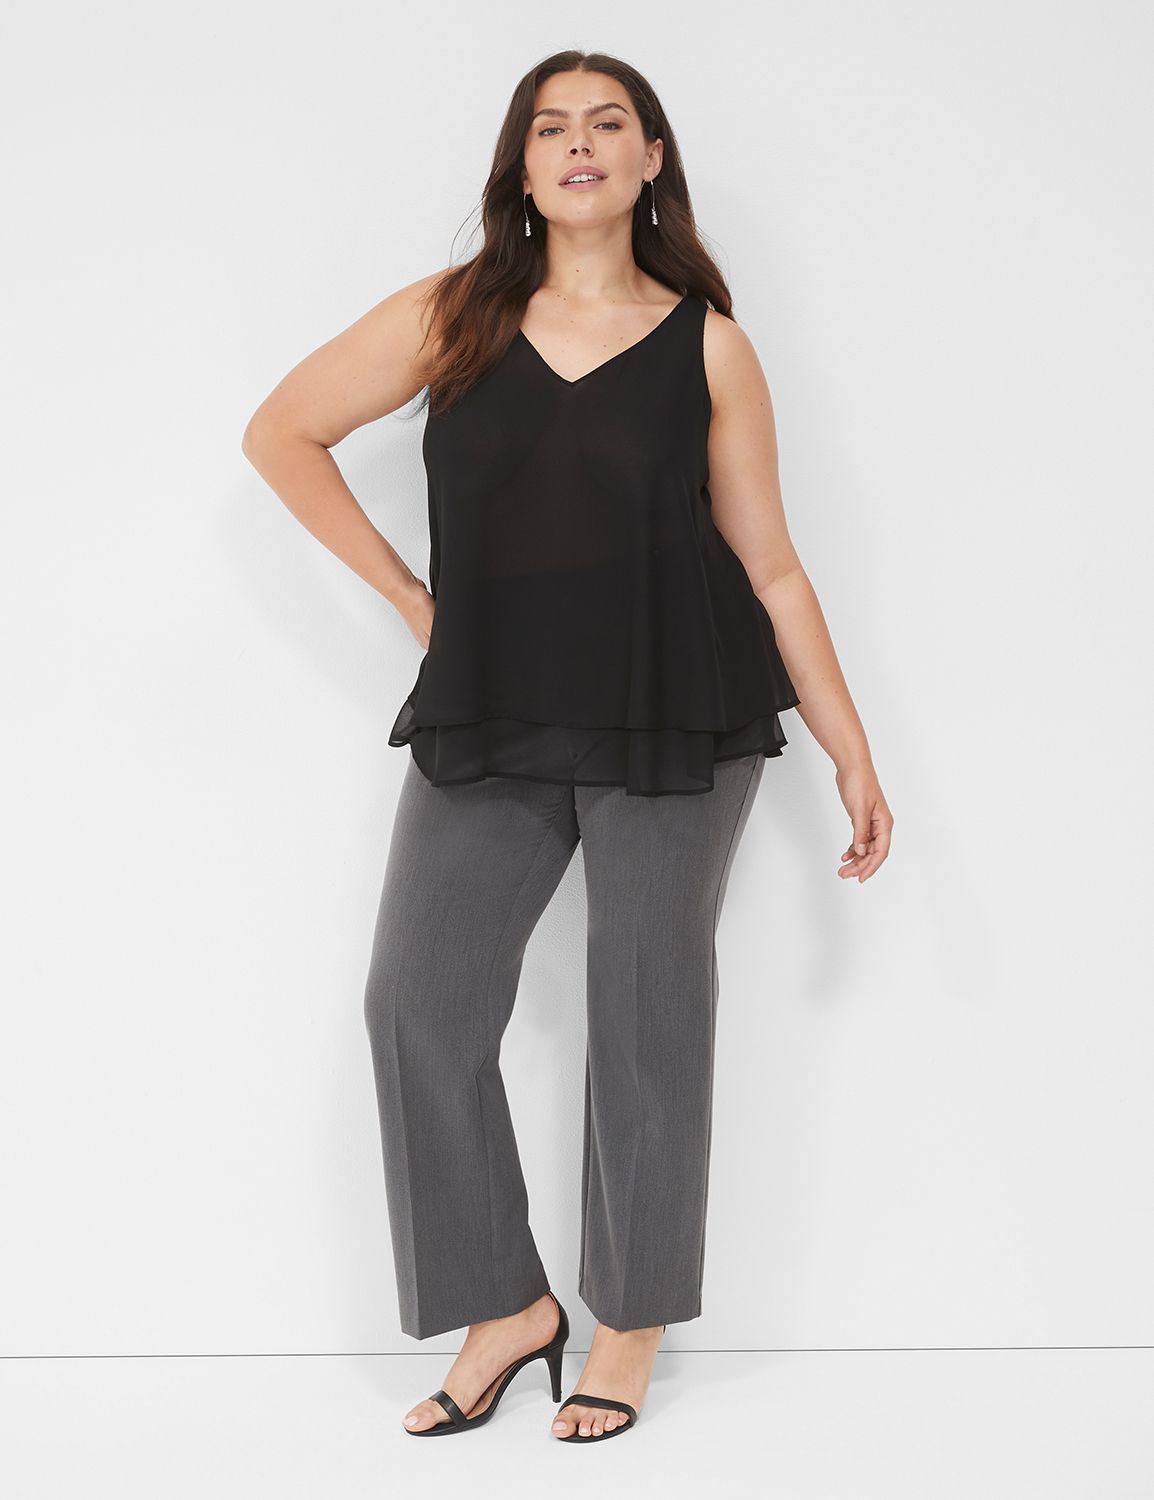 Spanx Heathered Layering Arm Tights - Gift with $100+ Spanx Purchase